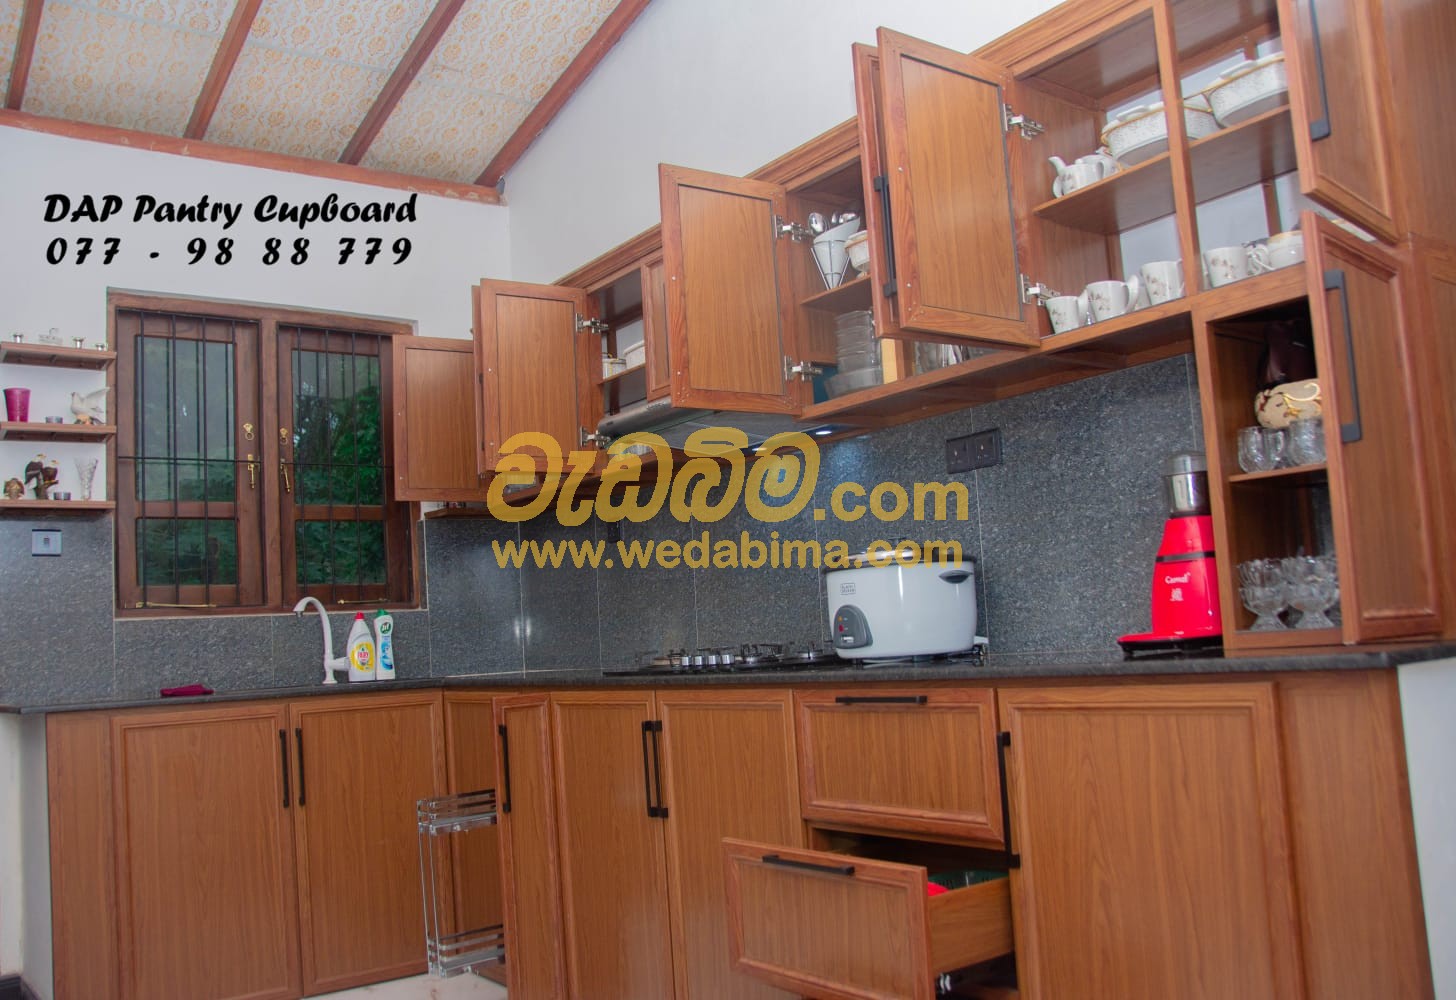 Cover image for stainless steel pantry cupboards in sri lanka